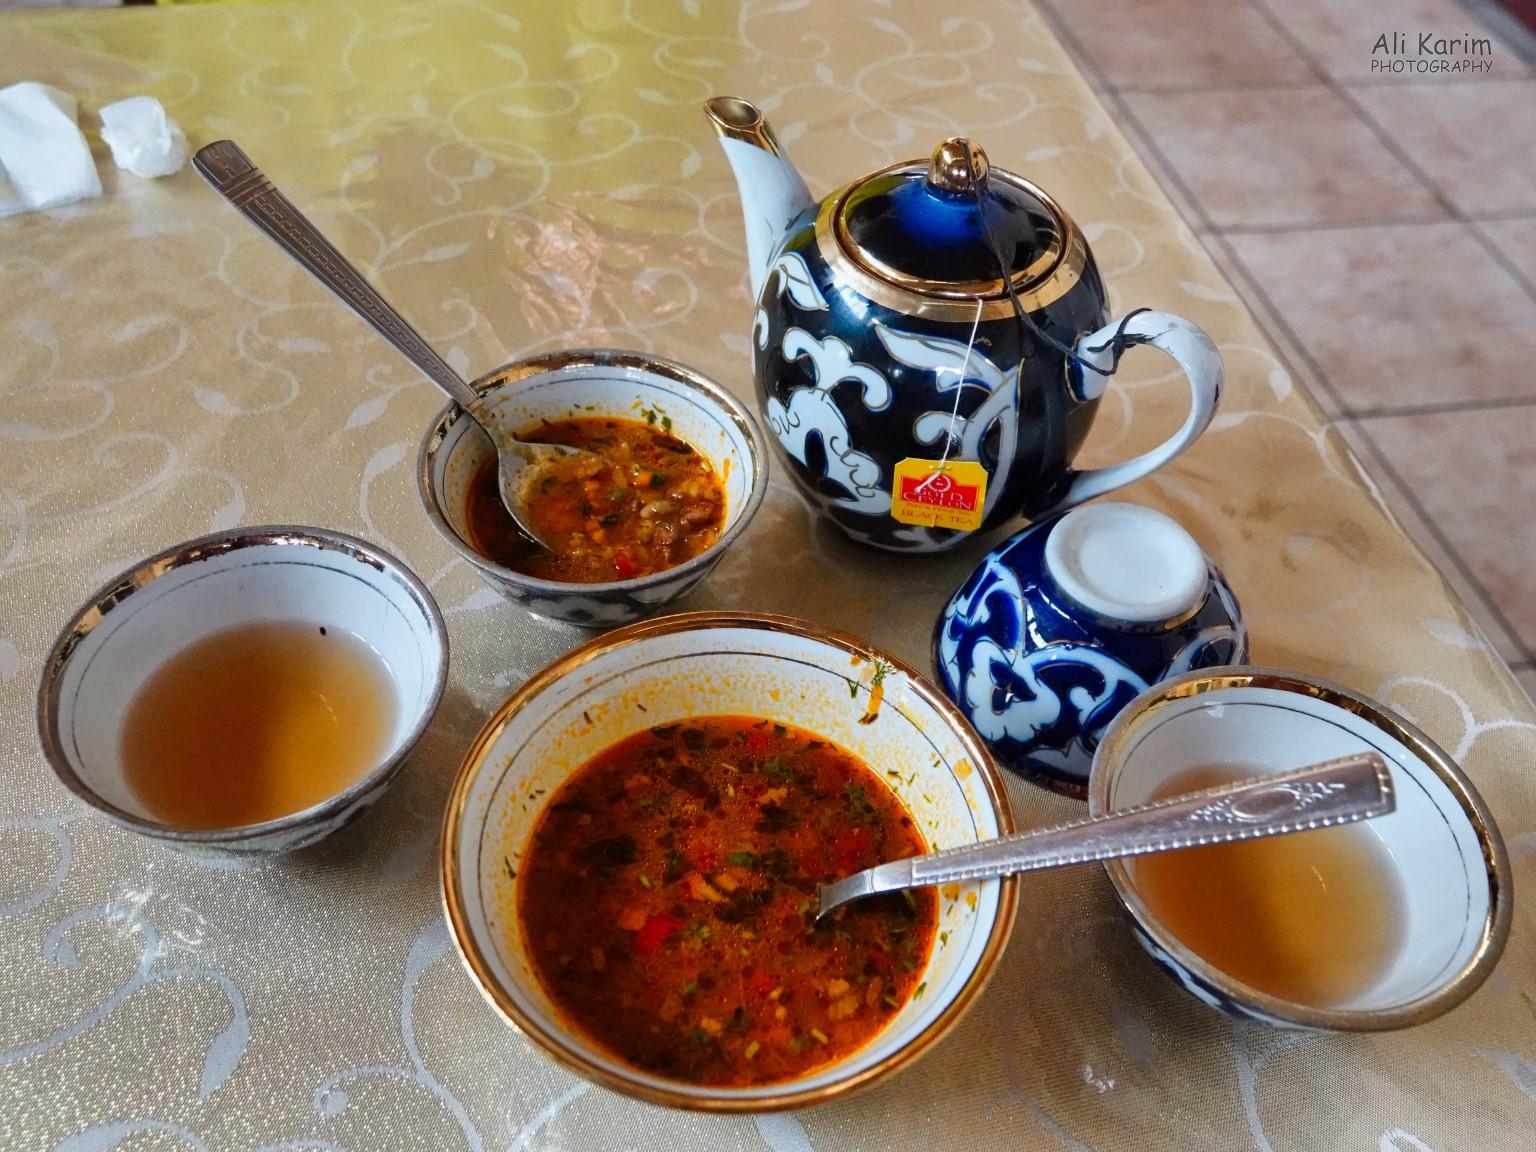 Tashkent, Oct 2019, Tea and snack of musark; a soup of minced meat and vegetables; quite tasty.